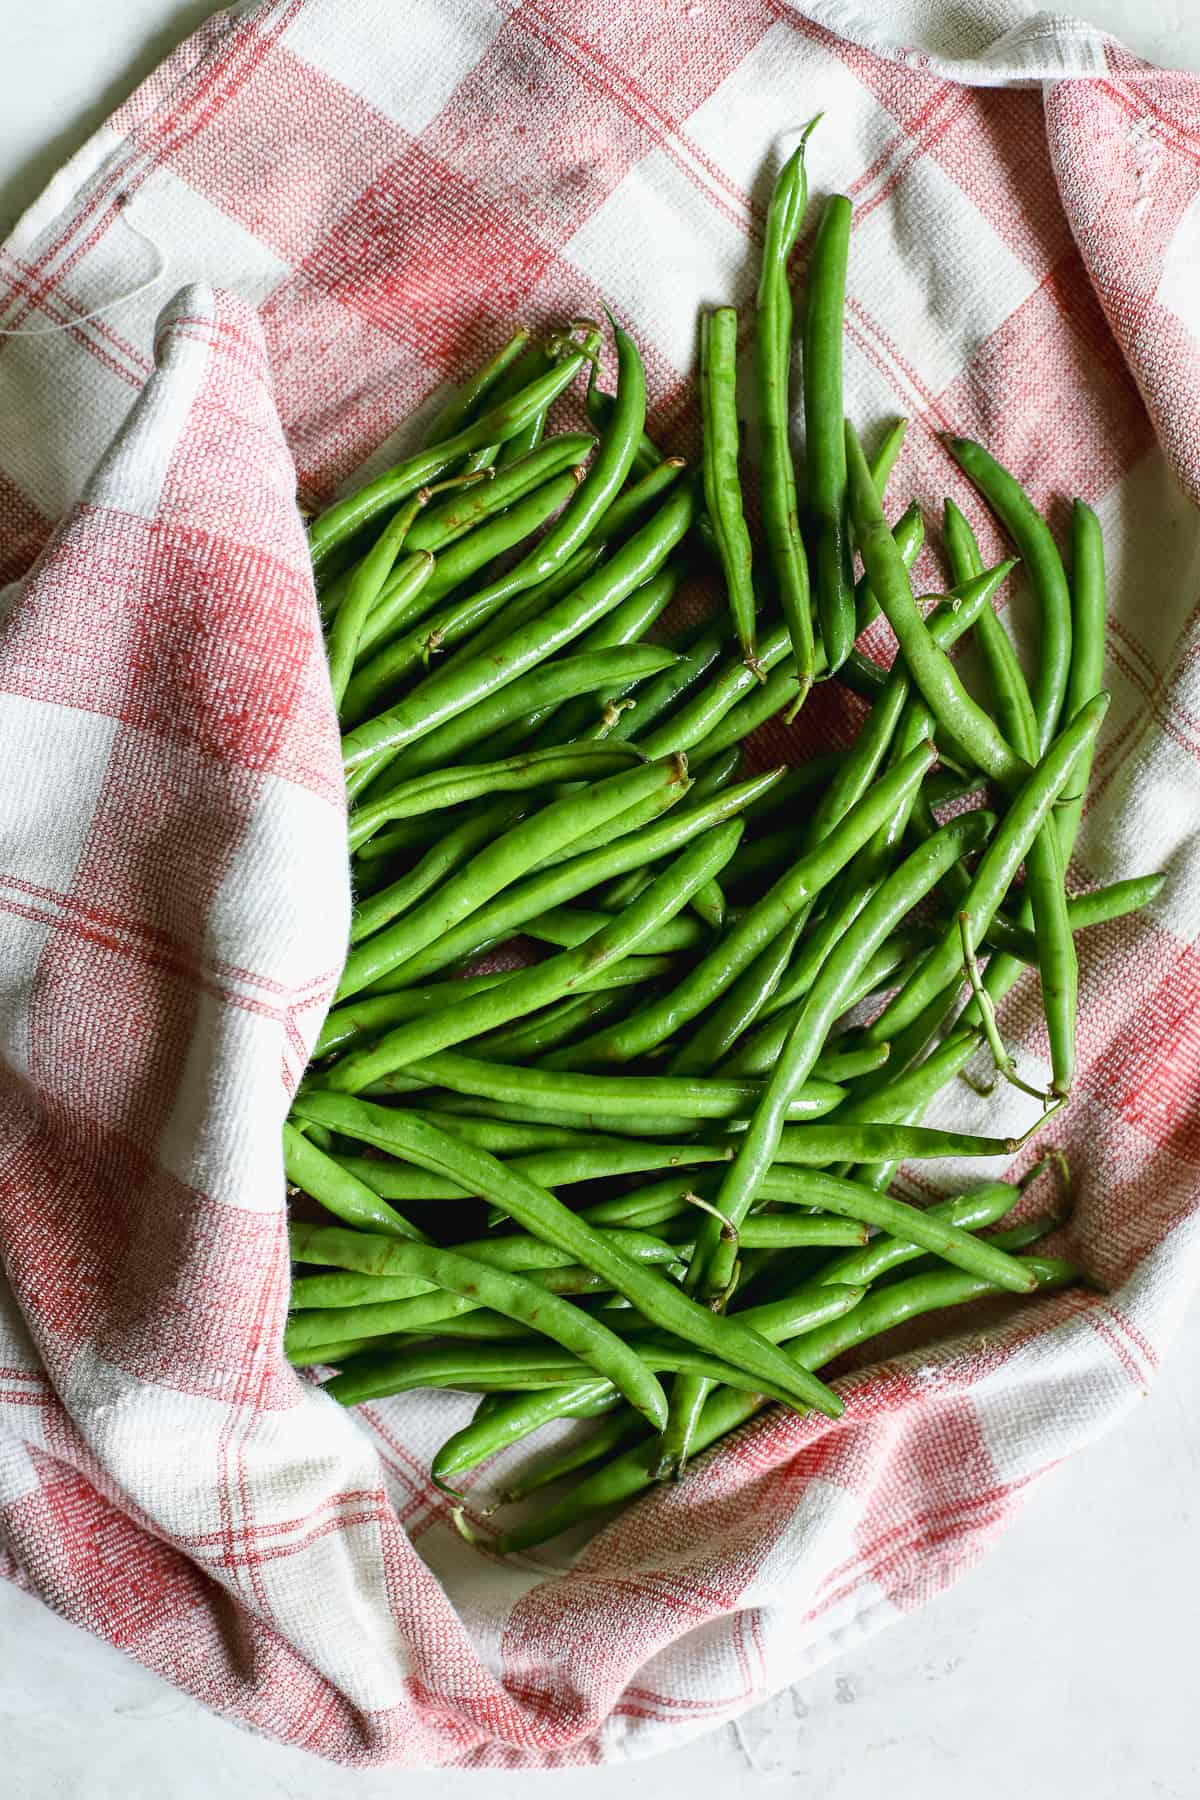 Drying fresh green beans on red and white towel